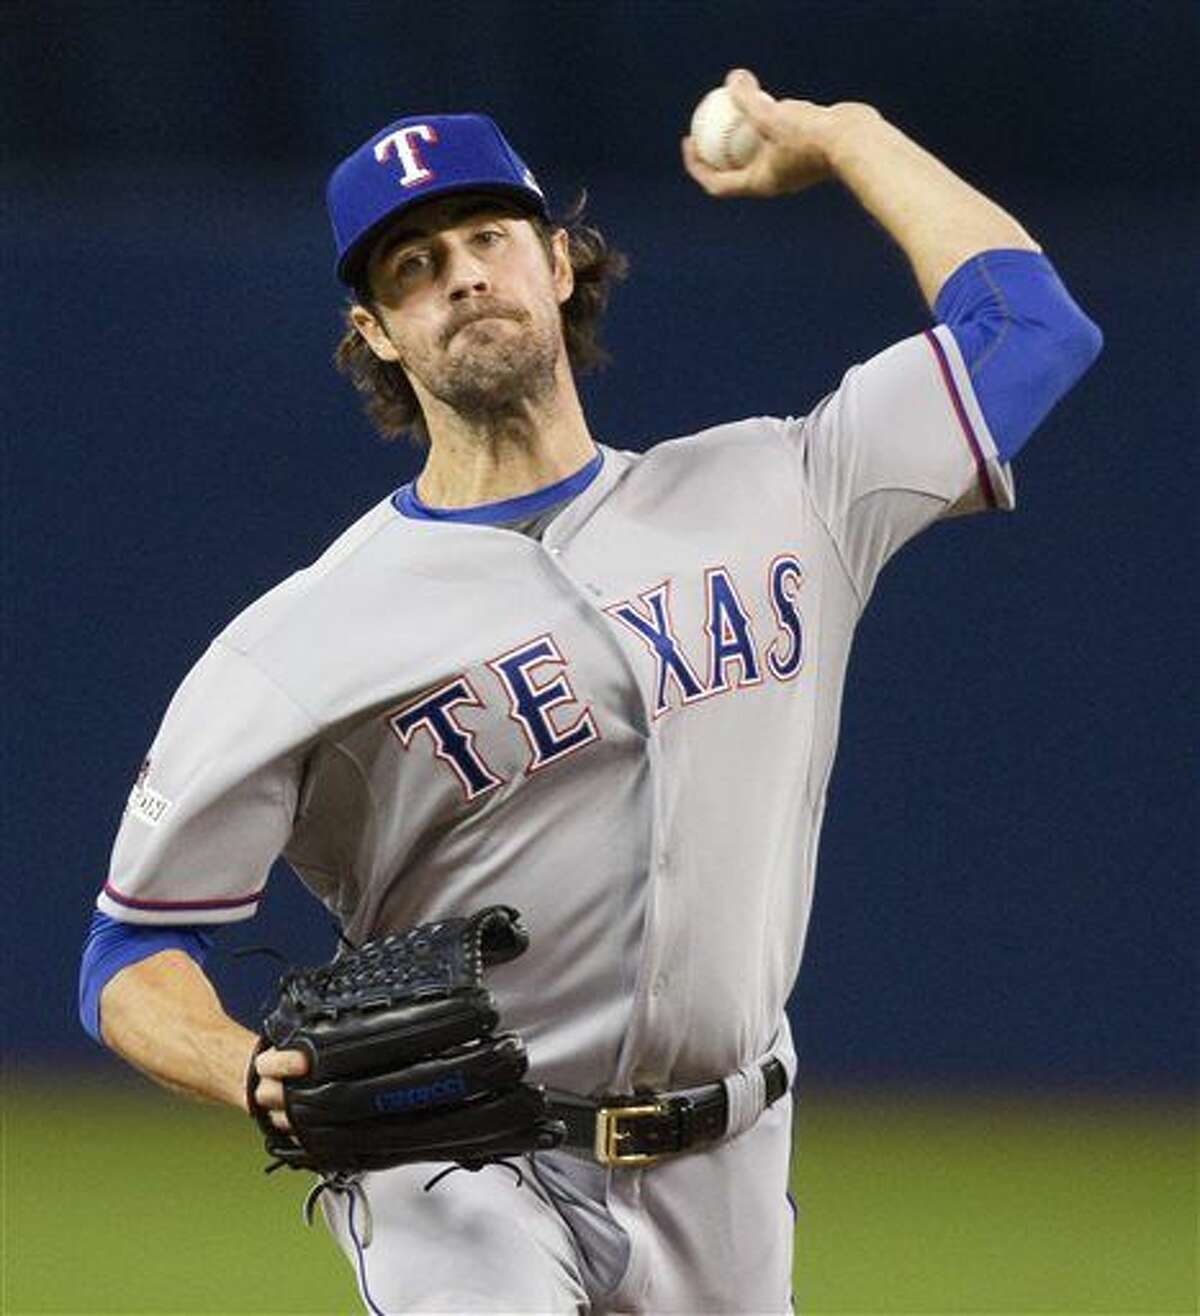 In this Oct. 9, 2015, file photo, Texas Rangers pitcher Cole Hamels throws against the Toronto Blue Jays in the first inning in Game 2 of baseballs American League Division Series in Toronto. Hamels has been picked to start on opening day for the AL West champion Texas Rangers, manager Jeff Banister announced Wednesday, March 23, 2016. (Fred Thornhill/The Canadian Press via AP, Pool, File)